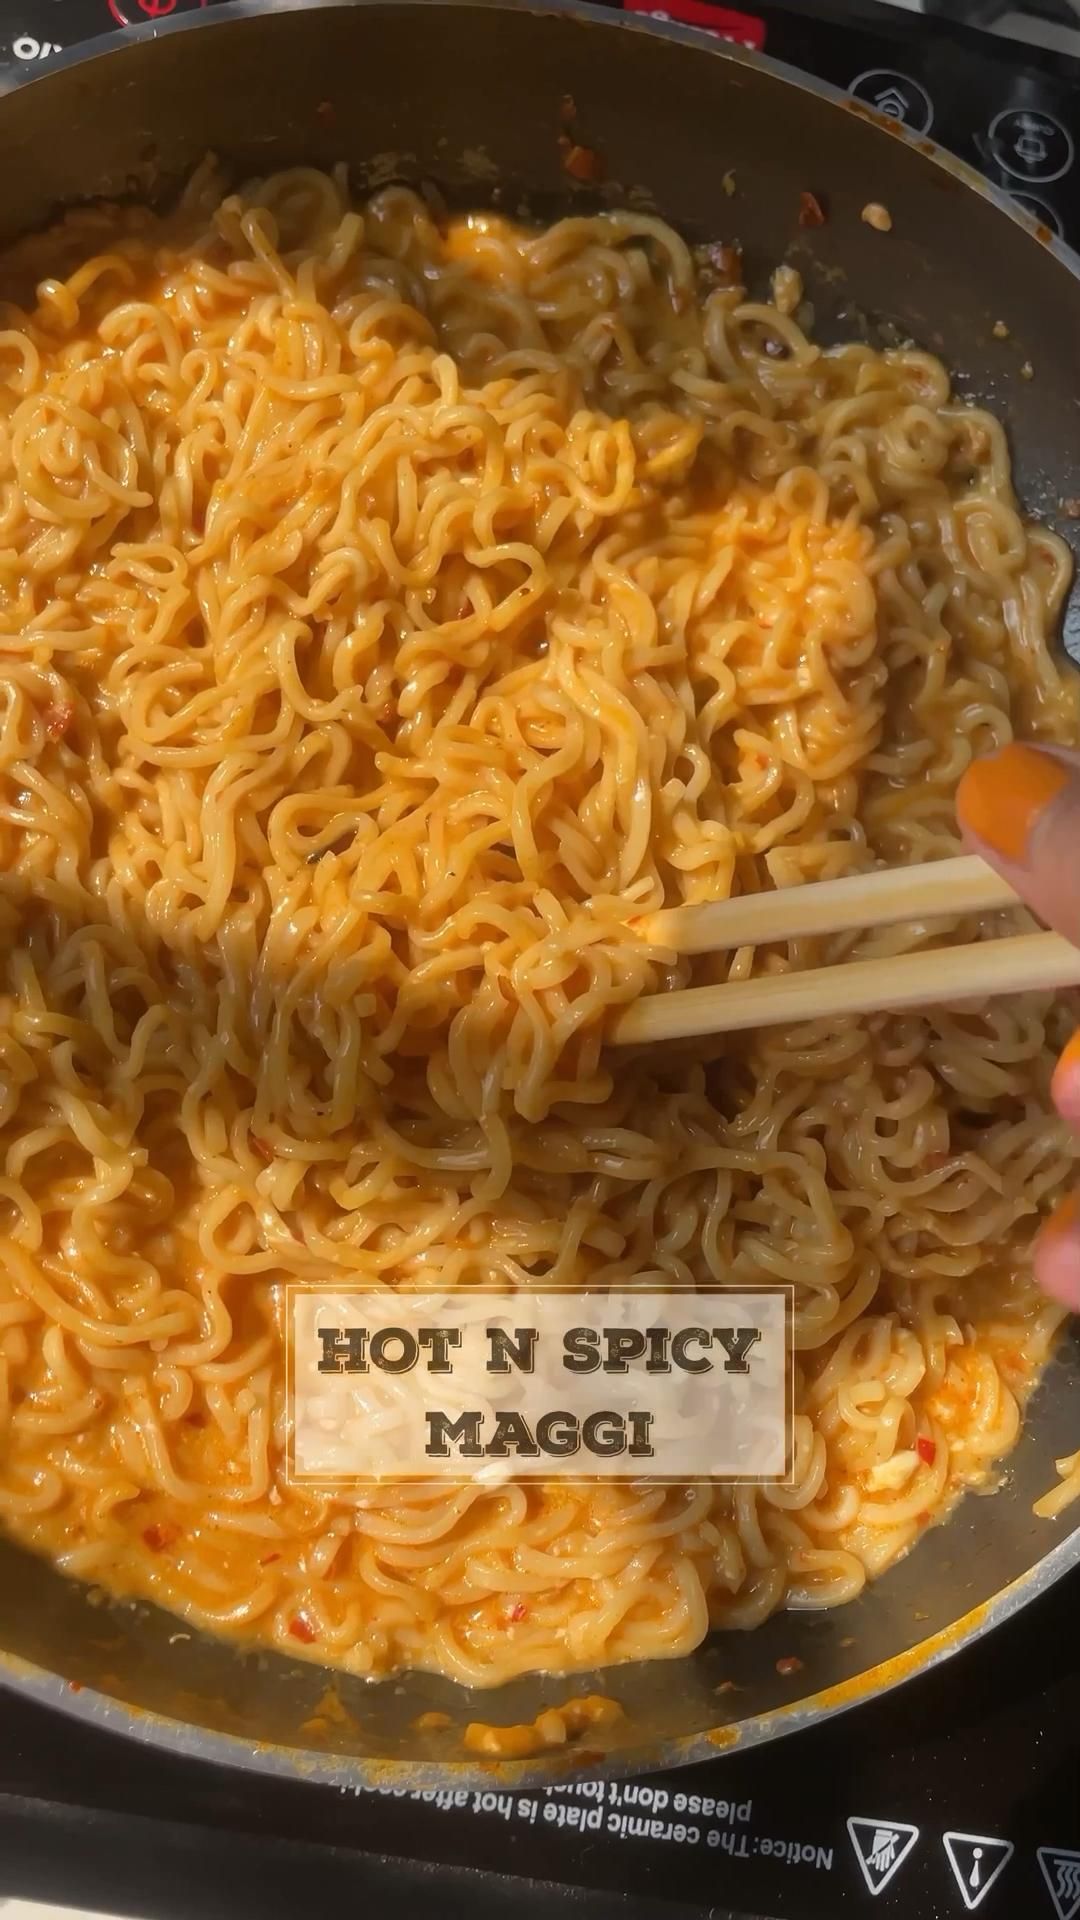 Hot n spicy maggi 🥵 Images